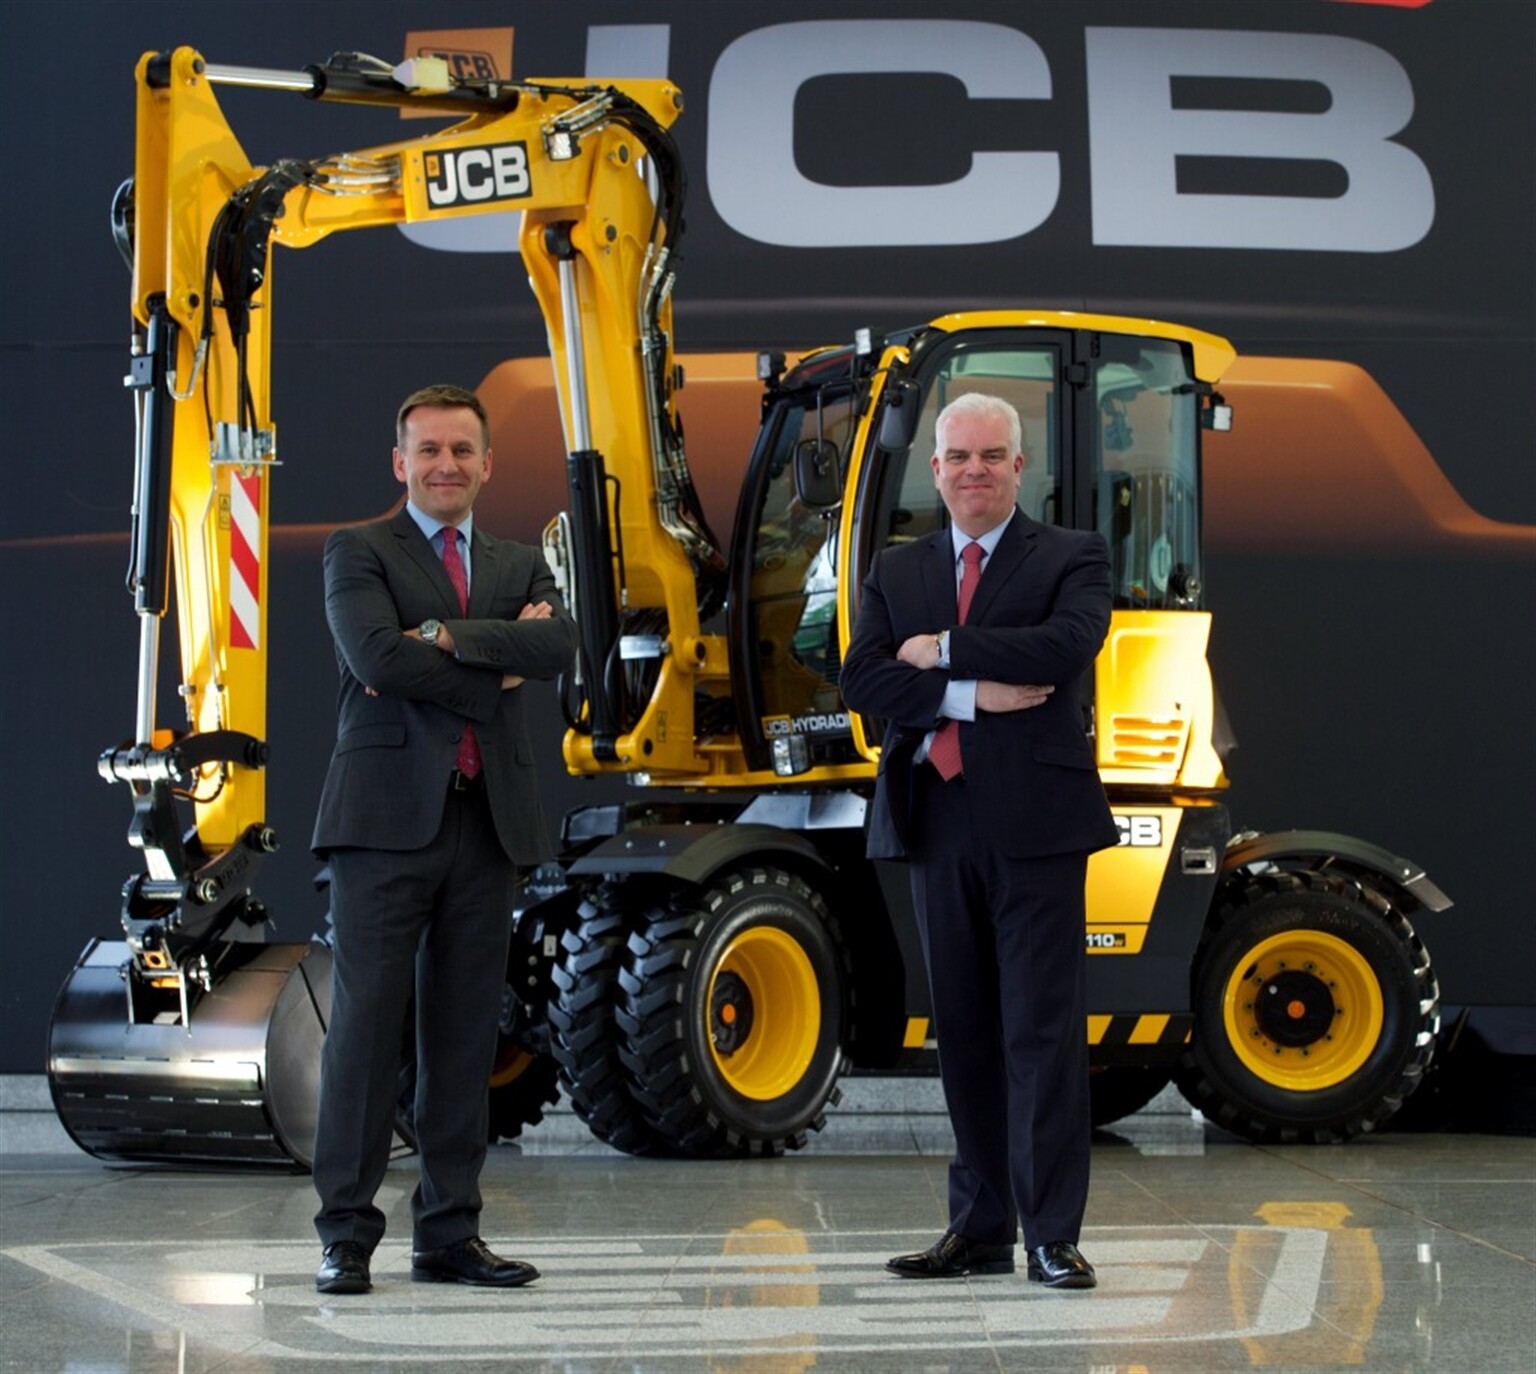 New jobs created at JCB as Hydradig orders flood in